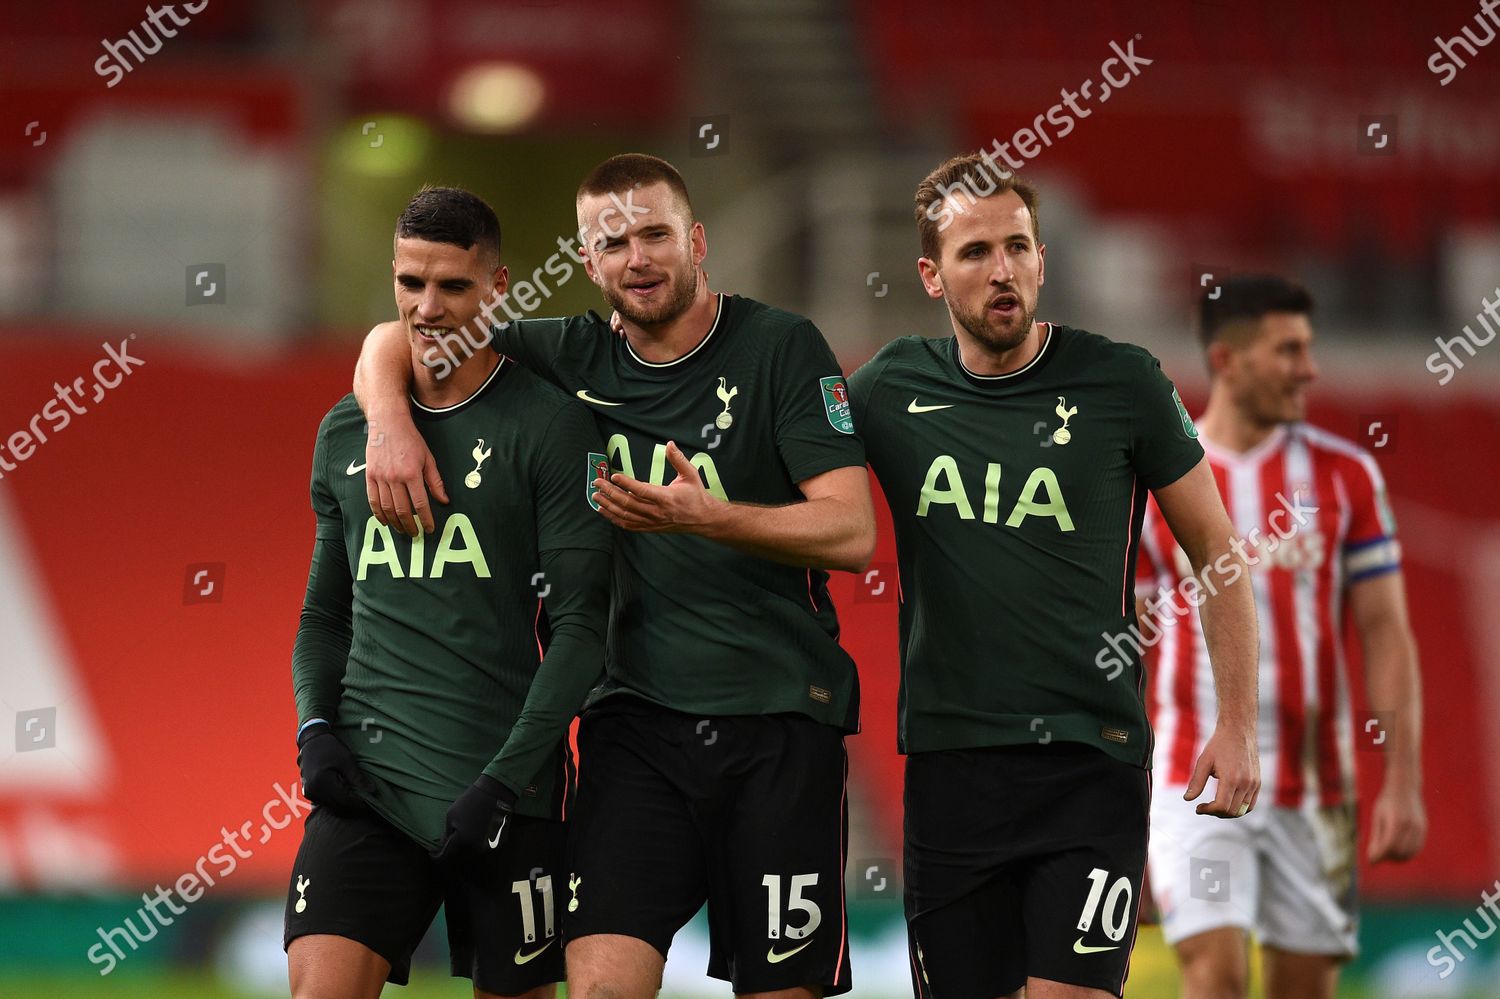 Eric Dier is LEFT OUT of Tottenham's squad for their Carabao Cup